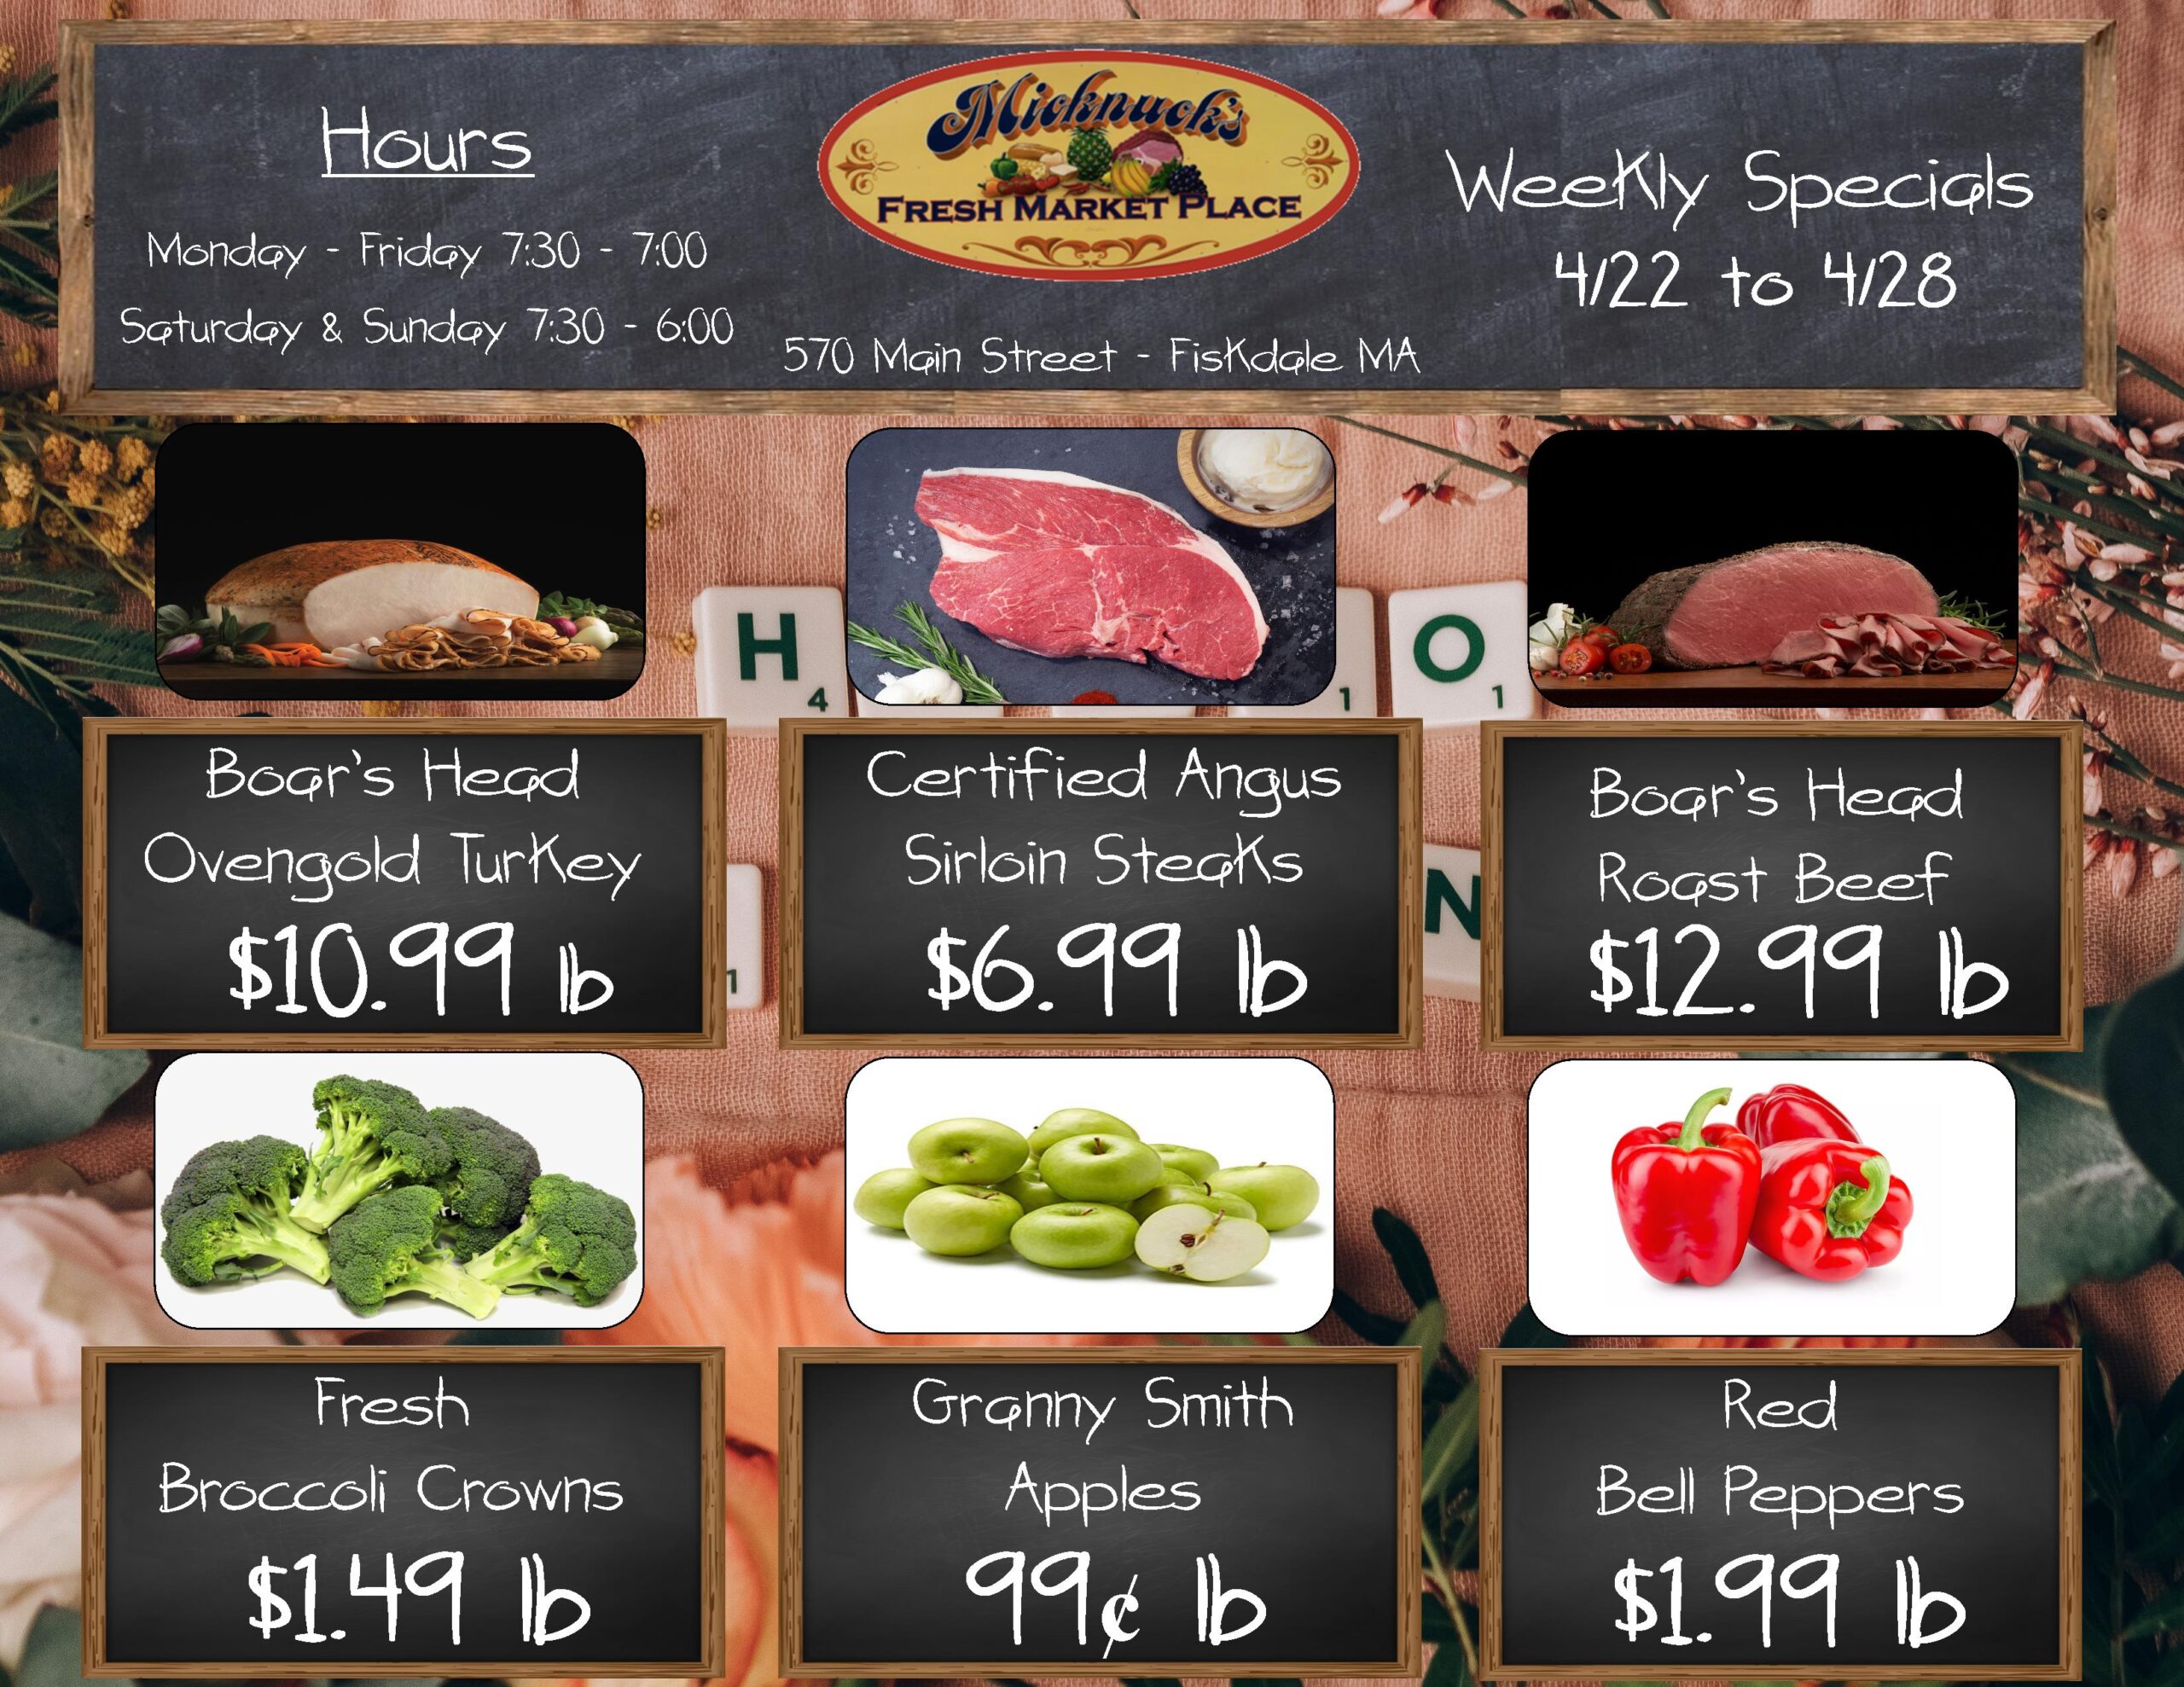 Weekly Specials 4/22 - 4/28. Boar's head Ovengold Turkey 10.99, Certified Angus Sirloin Steaks 6.99, Boar's Head Roast Beef 12.99, Fresh Broccoli Crowns, 1.49, Granny Smith Apples .99, Red Bell Peppers 1.99